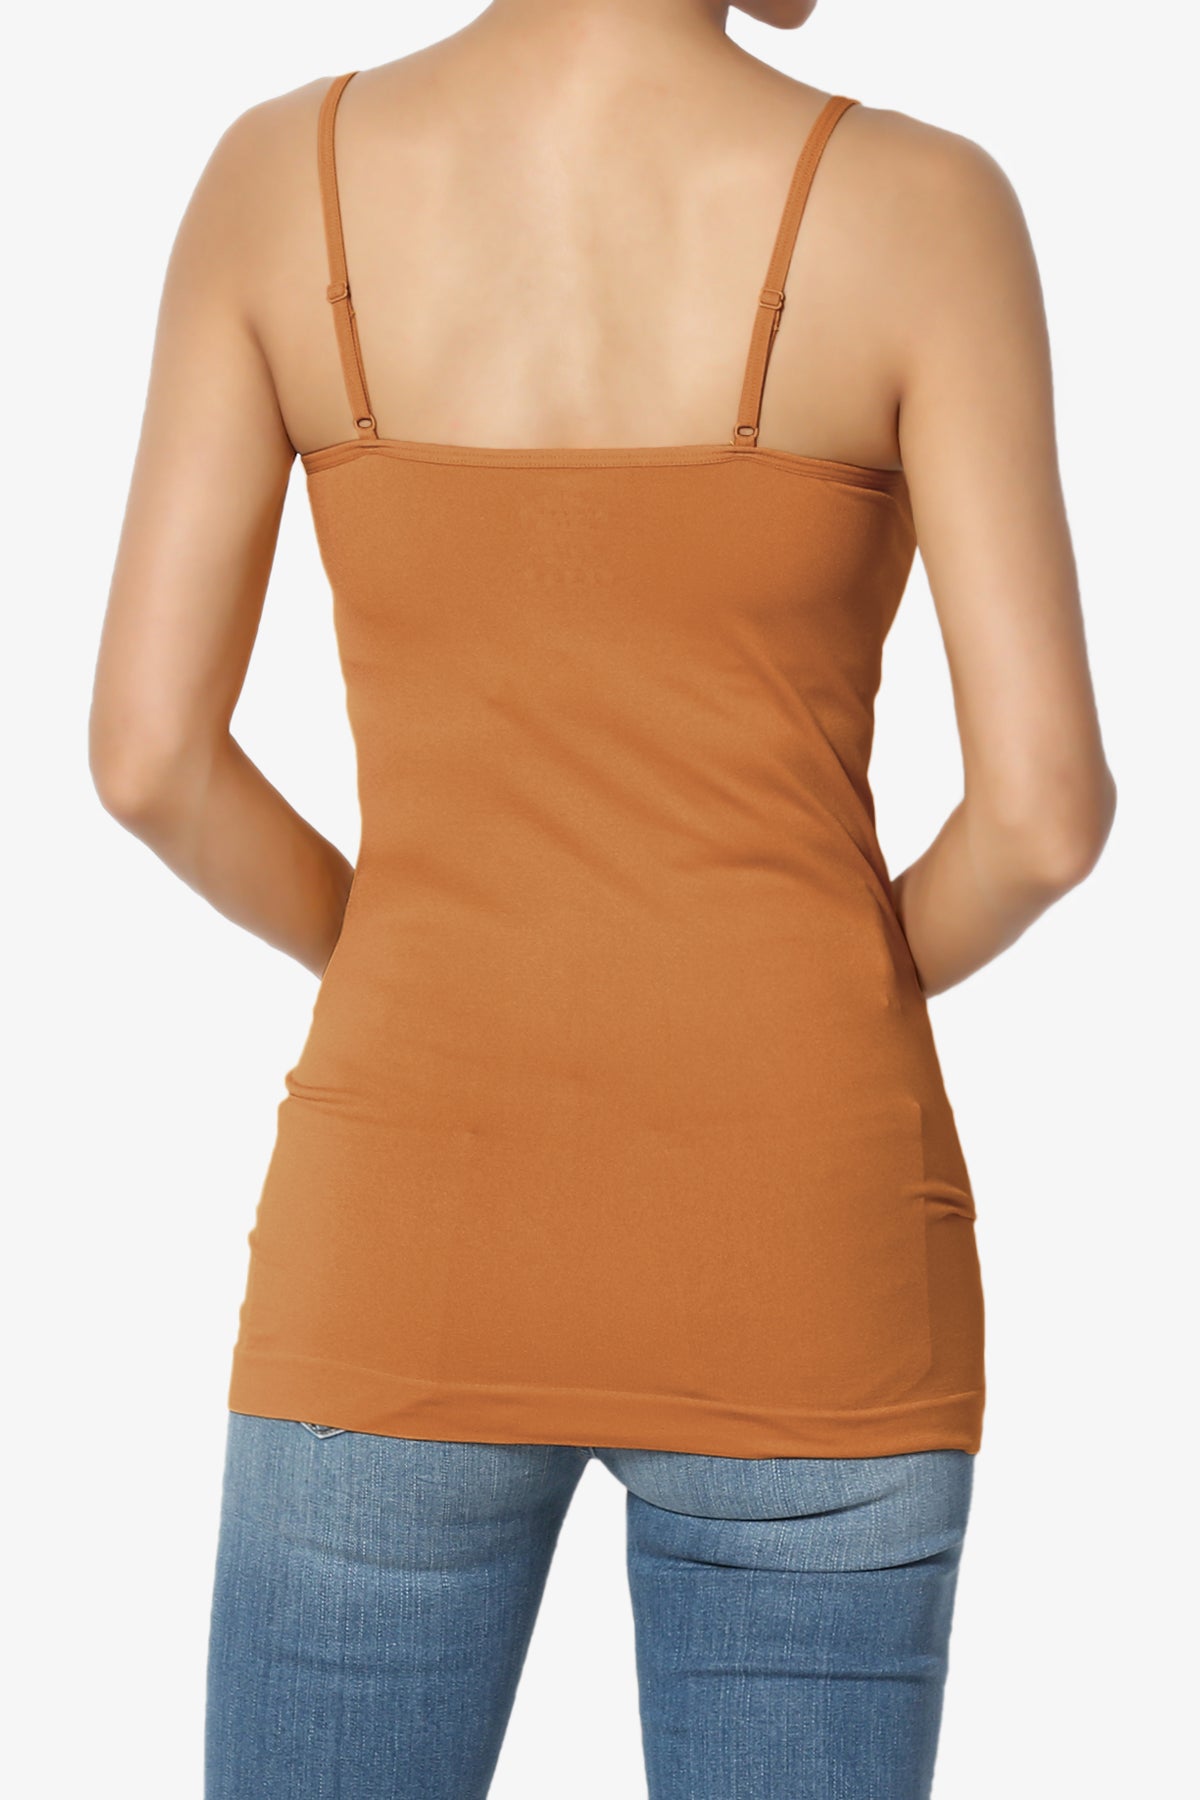 Load image into Gallery viewer, Himari Seamless Camisole Top ALMOND_2
